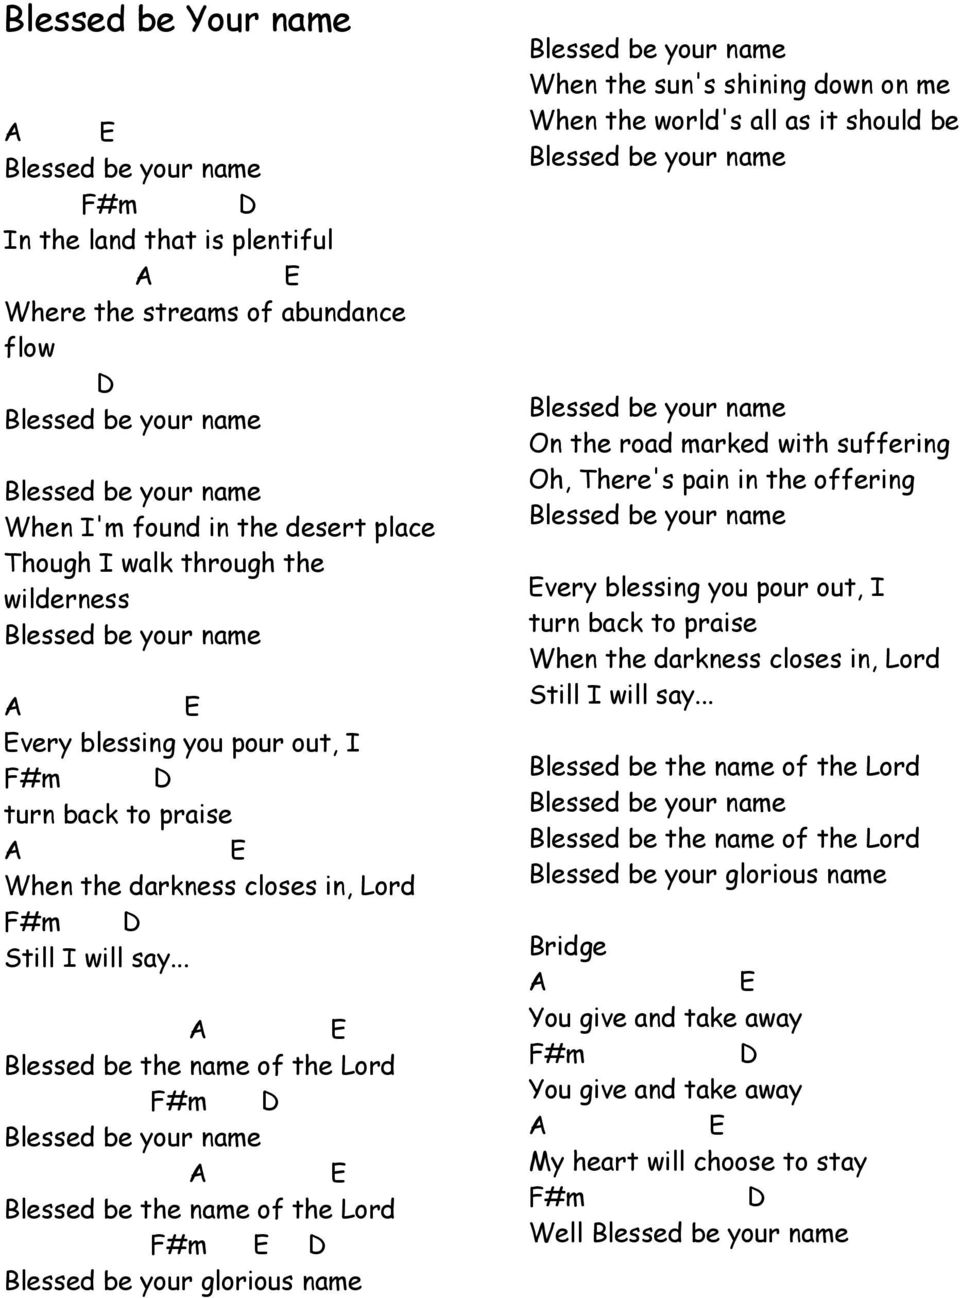 .. E Blessed be the name of the Lord F#m Blessed be your name E Blessed be the name of the Lord F#m E Blessed be your glorious name Blessed be your name When the sun's shining down on me When the